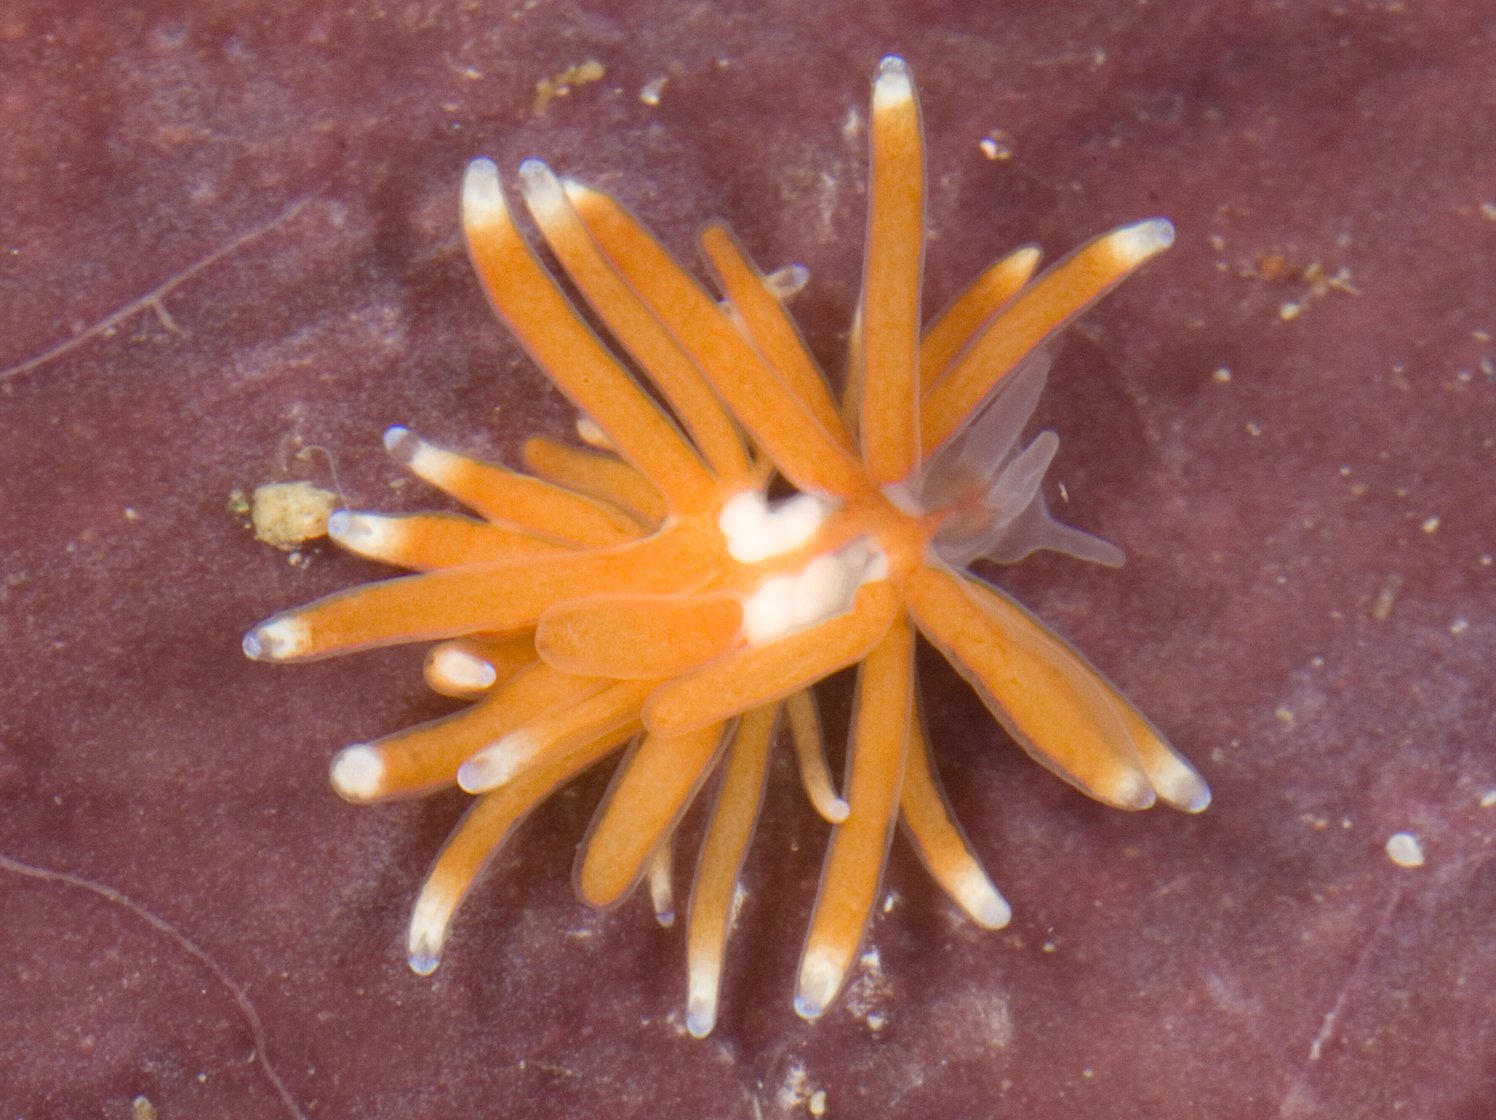 Tergiposacca longicerata, a new sea slug from the Philippines (Terry Gosliner © 2017 California Academy of Sciences)